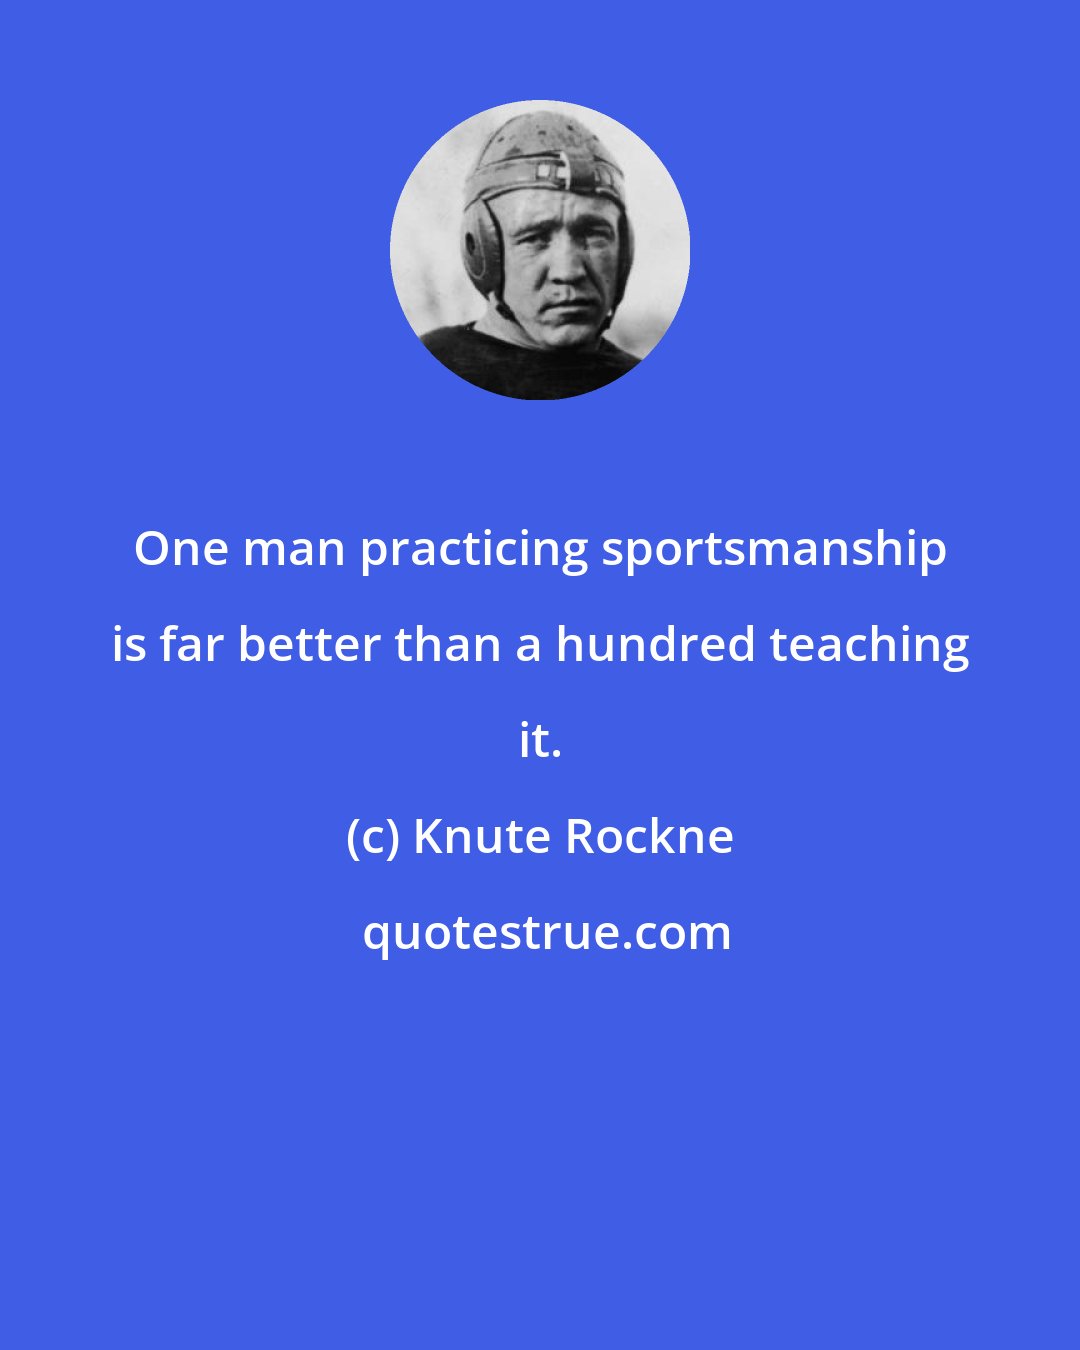 Knute Rockne: One man practicing sportsmanship is far better than a hundred teaching it.